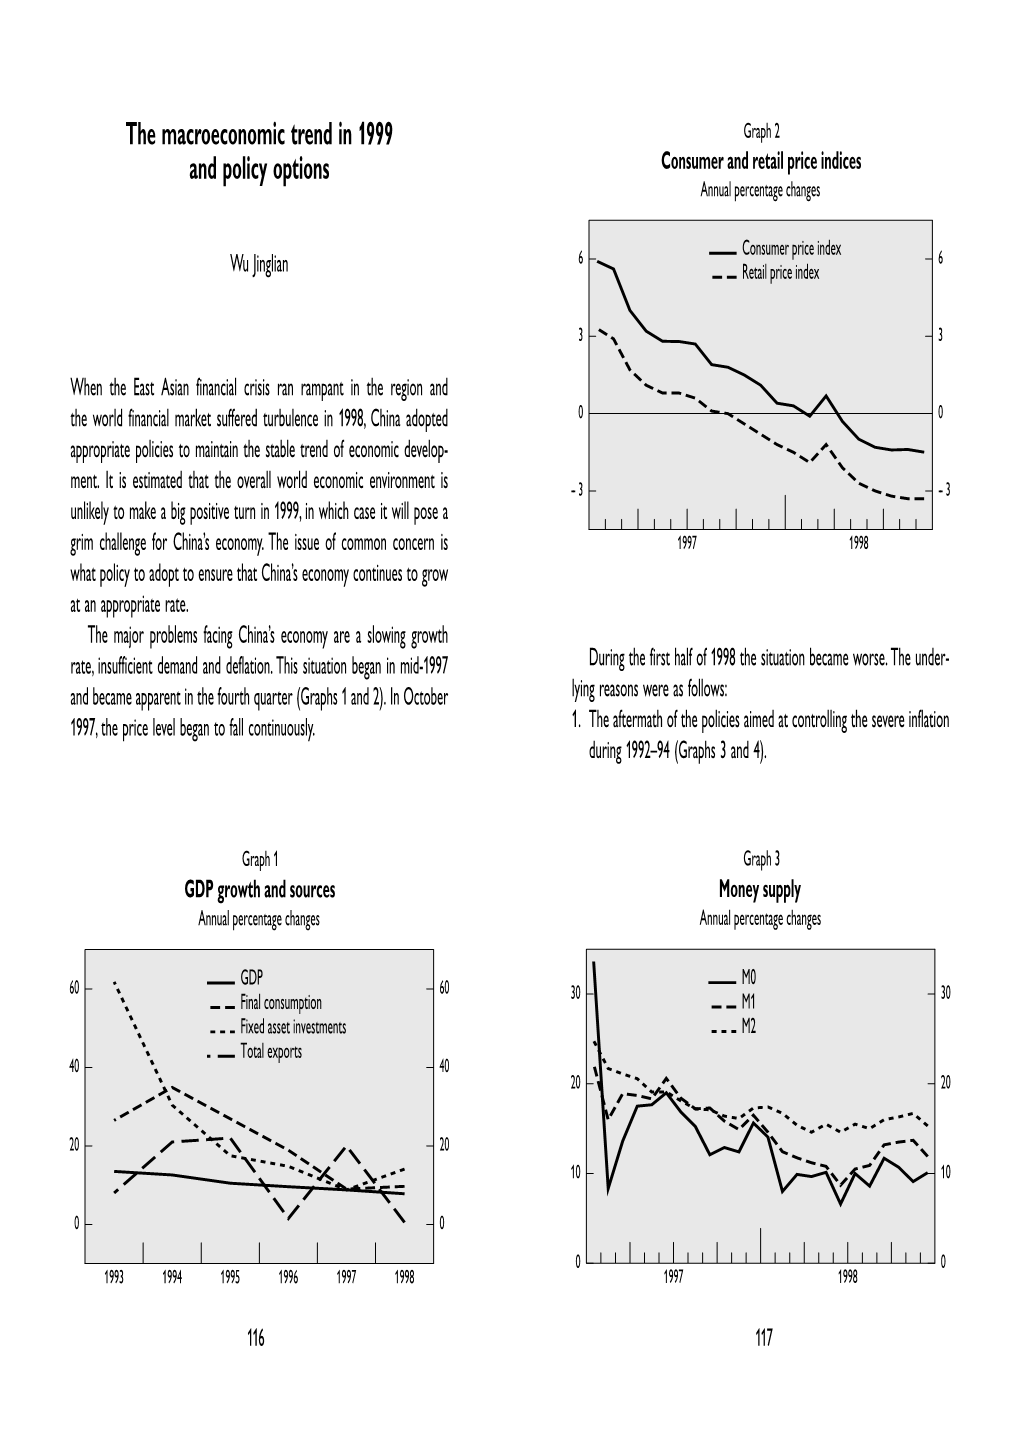 The Macroeconomic Trend in 1999 and Policy Options